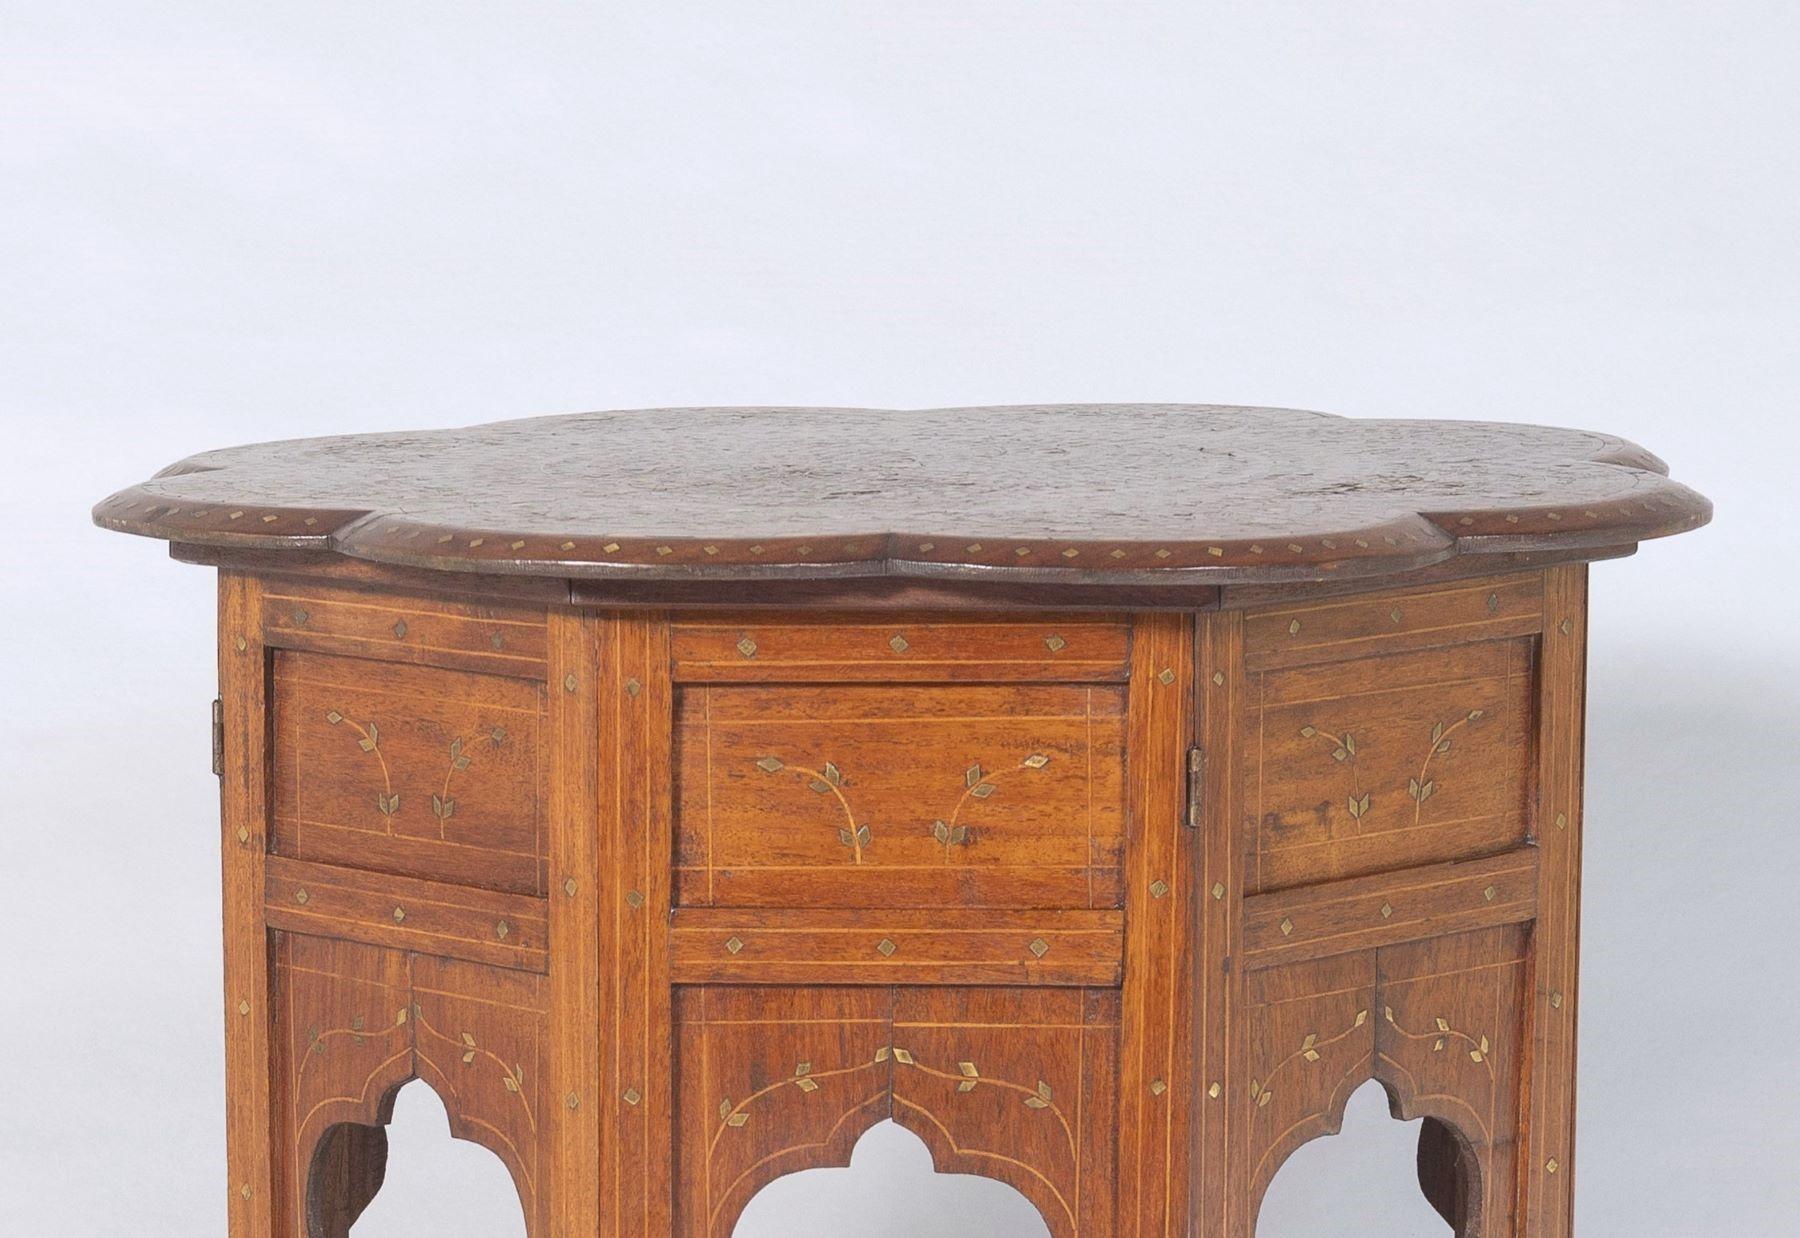 Hand-Crafted 19th Century Hoshiarpur Inlaid Occasional Side Table – British India